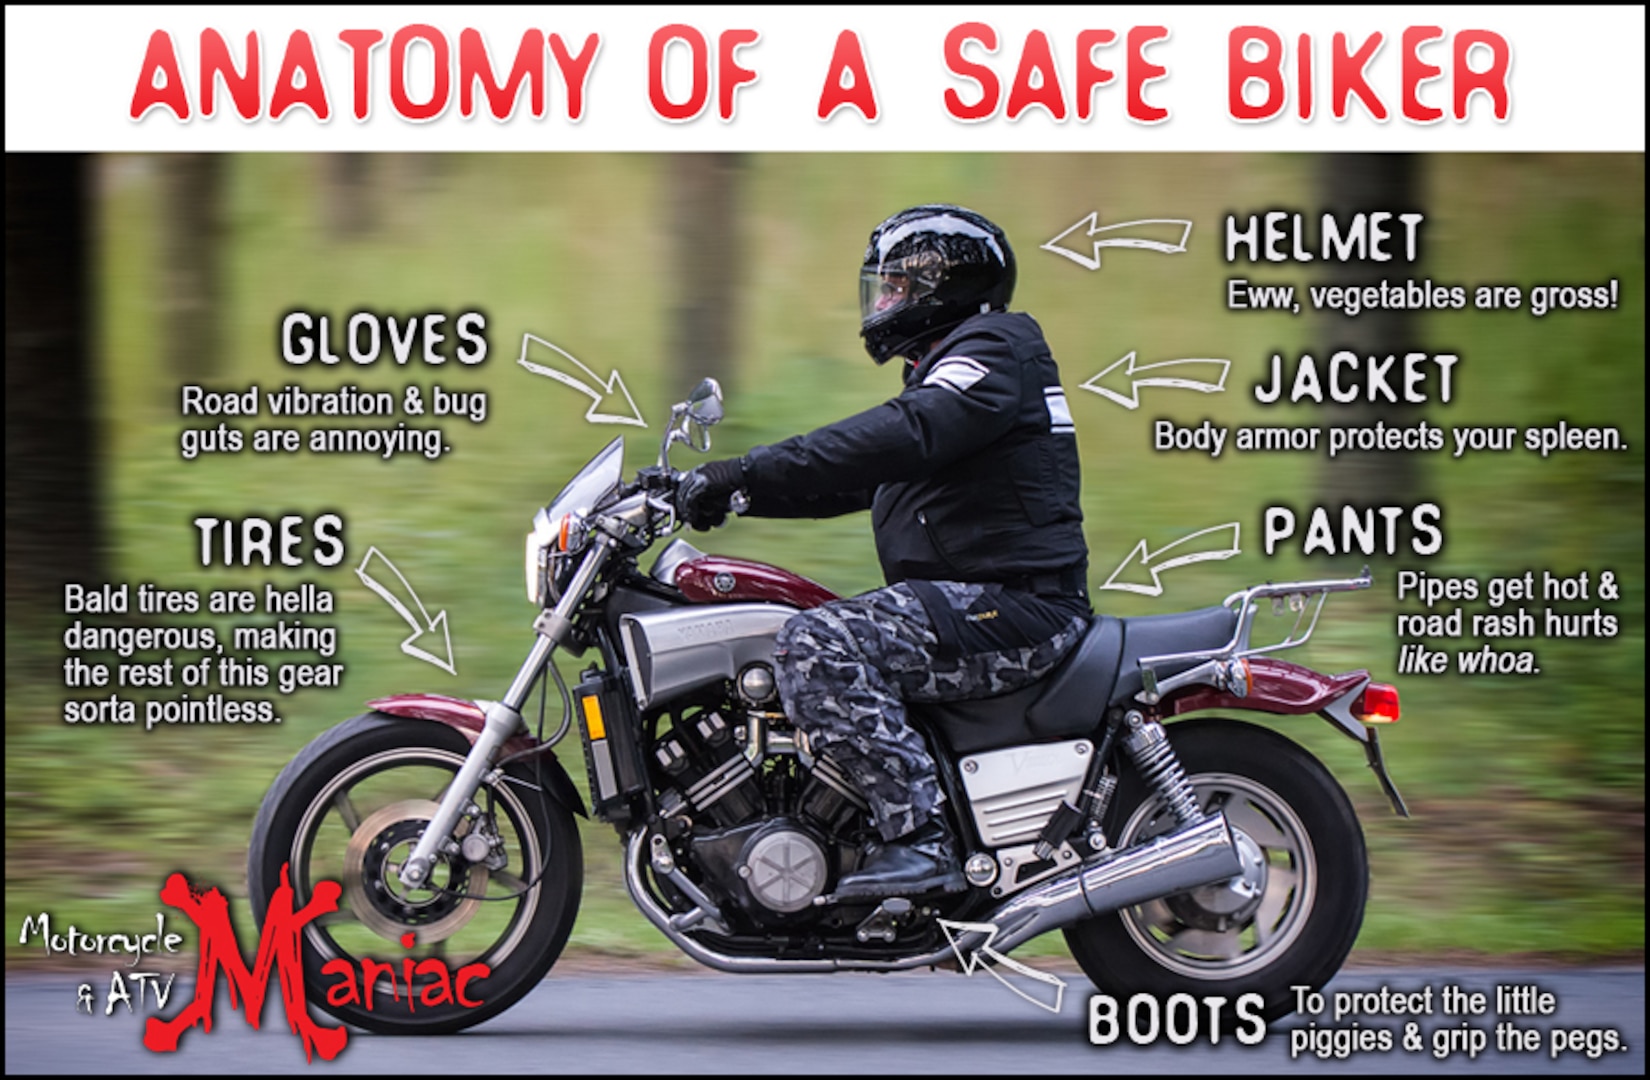 Riding a motorcycle can be a fun hobby and fuel-efficient way to travel. However, if riders aren’t keeping their own safety in mind, their ride might be over sooner than expected.
